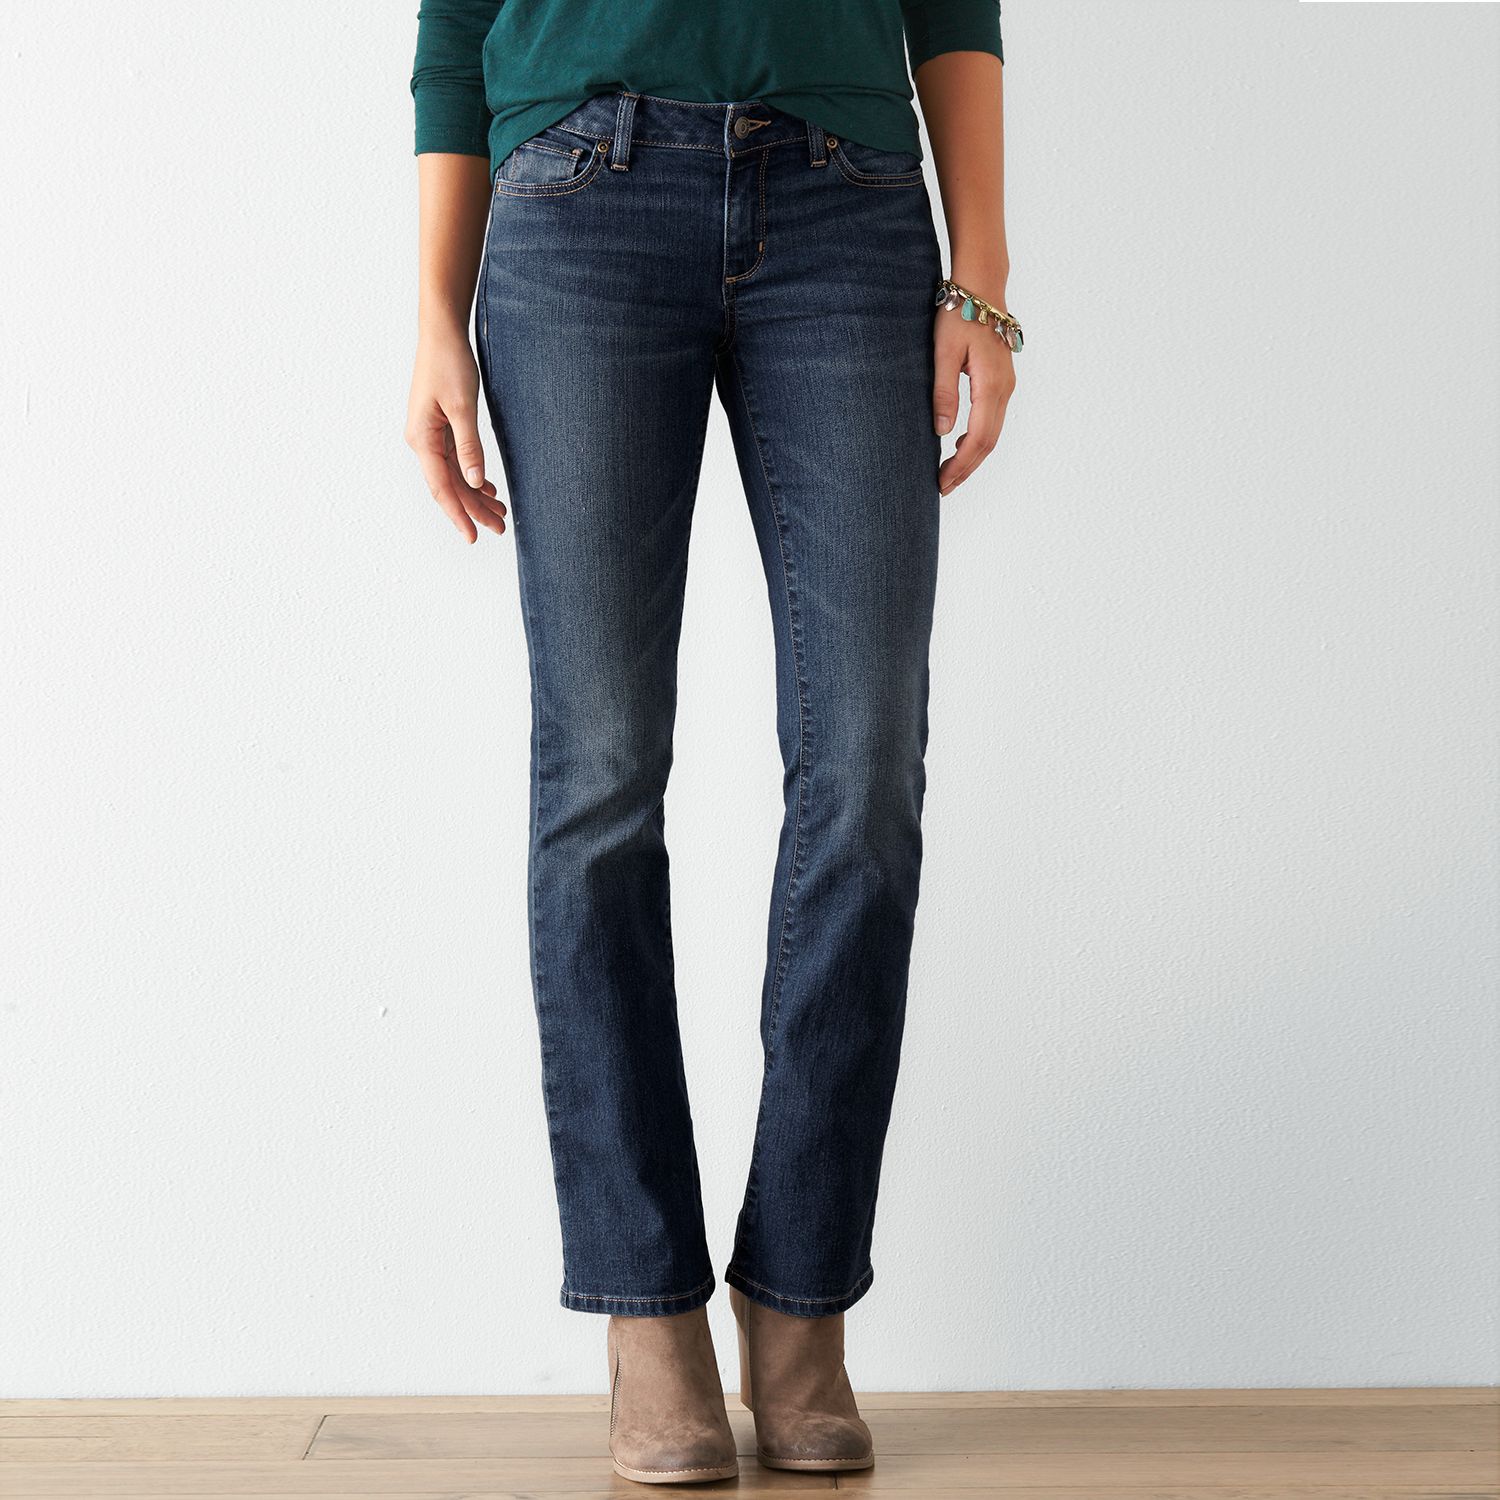 sonoma womens bootcut jeans